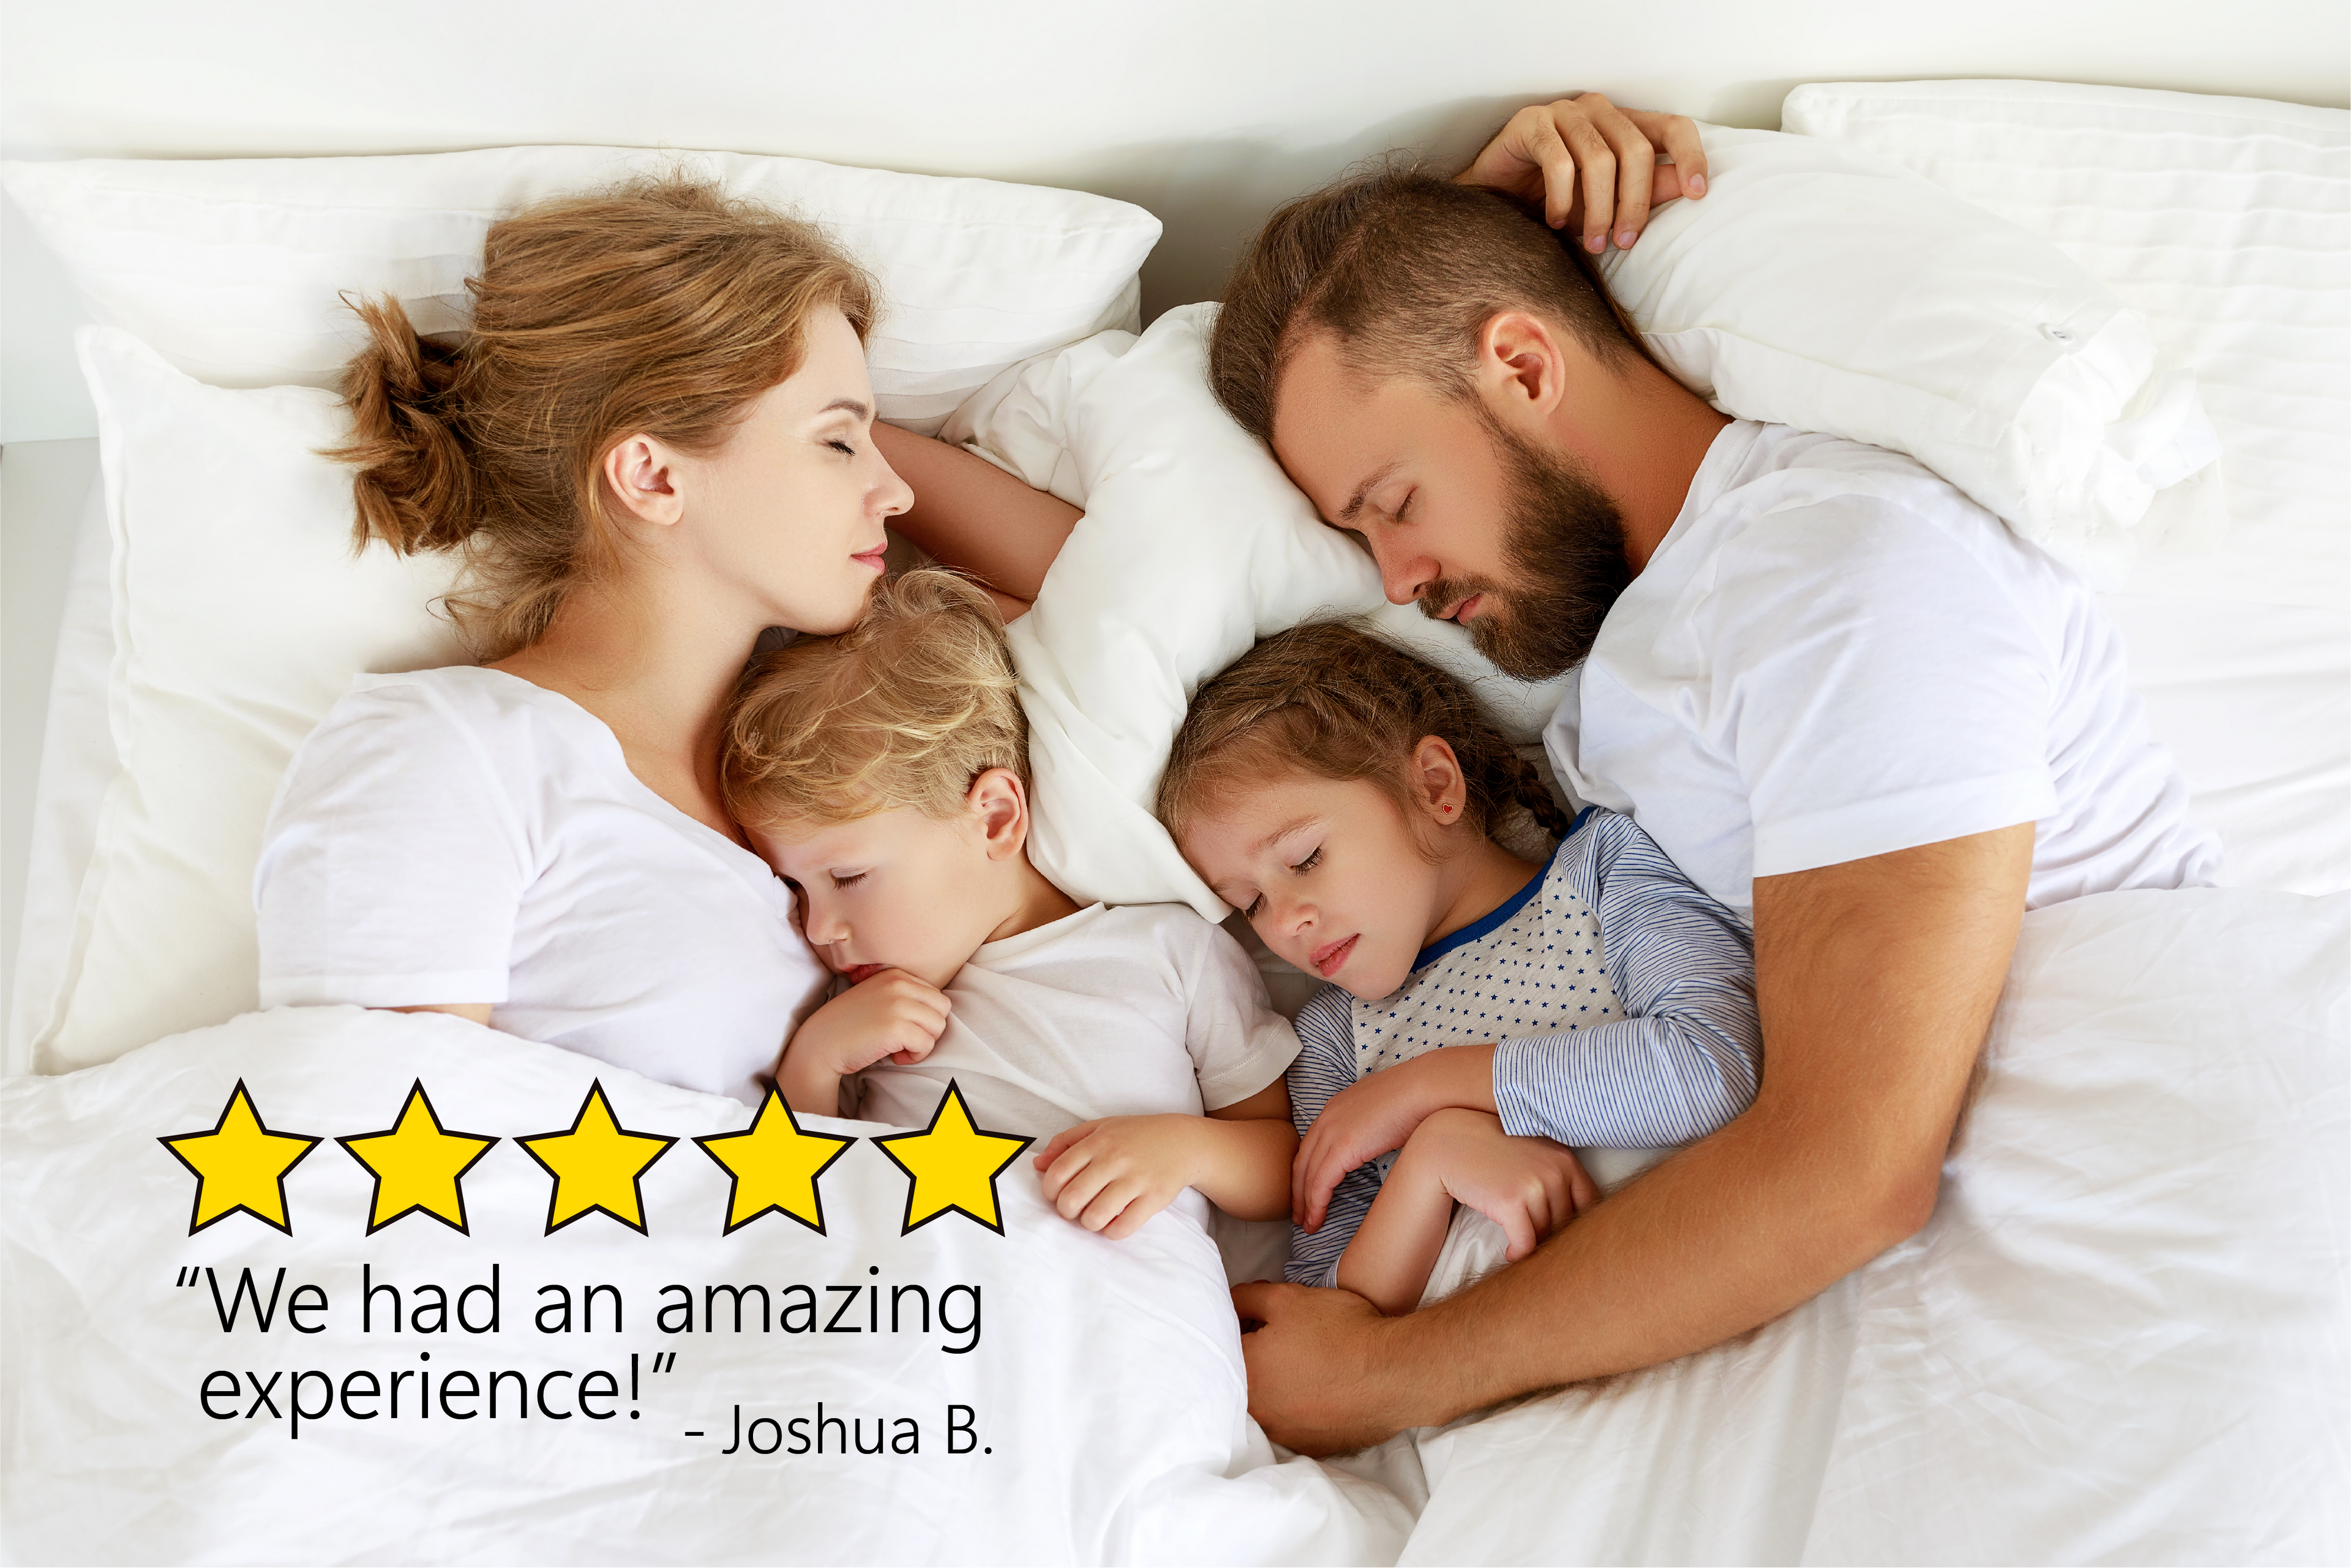 5-Star Review for The Ethical Mattress Company. "We had an amazing experience!" Joshua B.